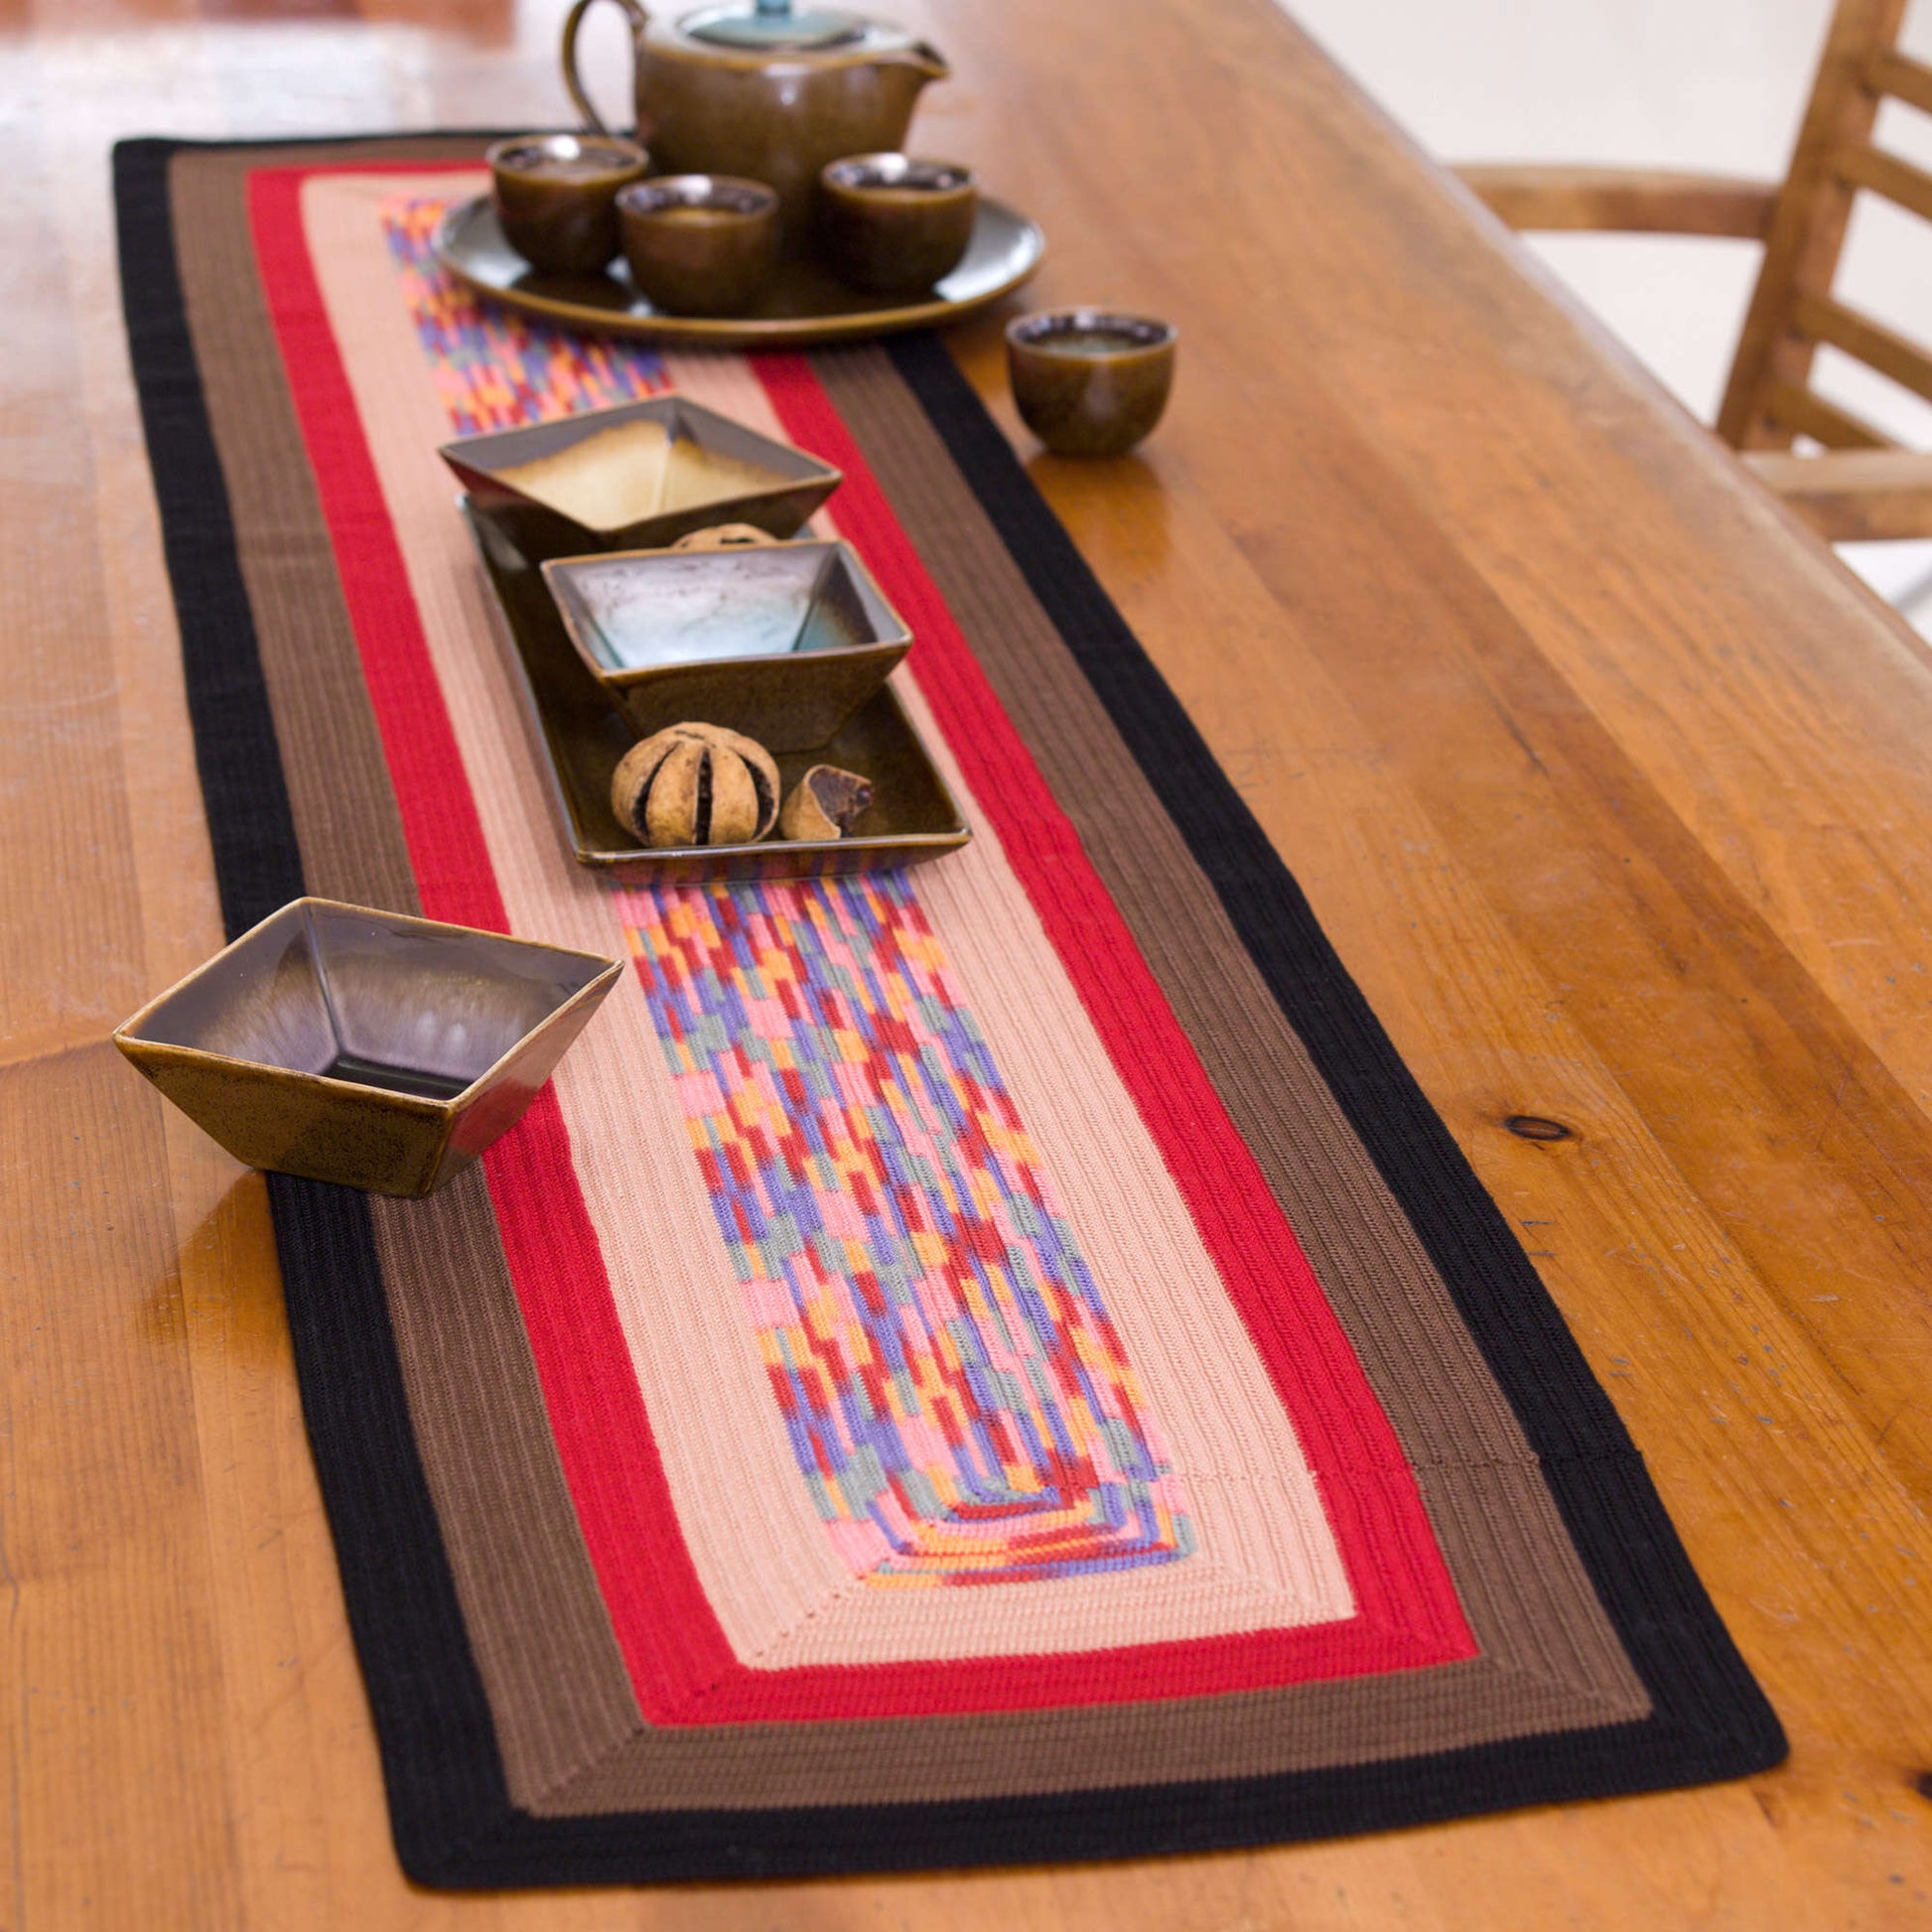 Free Aunt Lydia's Square on Square Table Runner Pattern